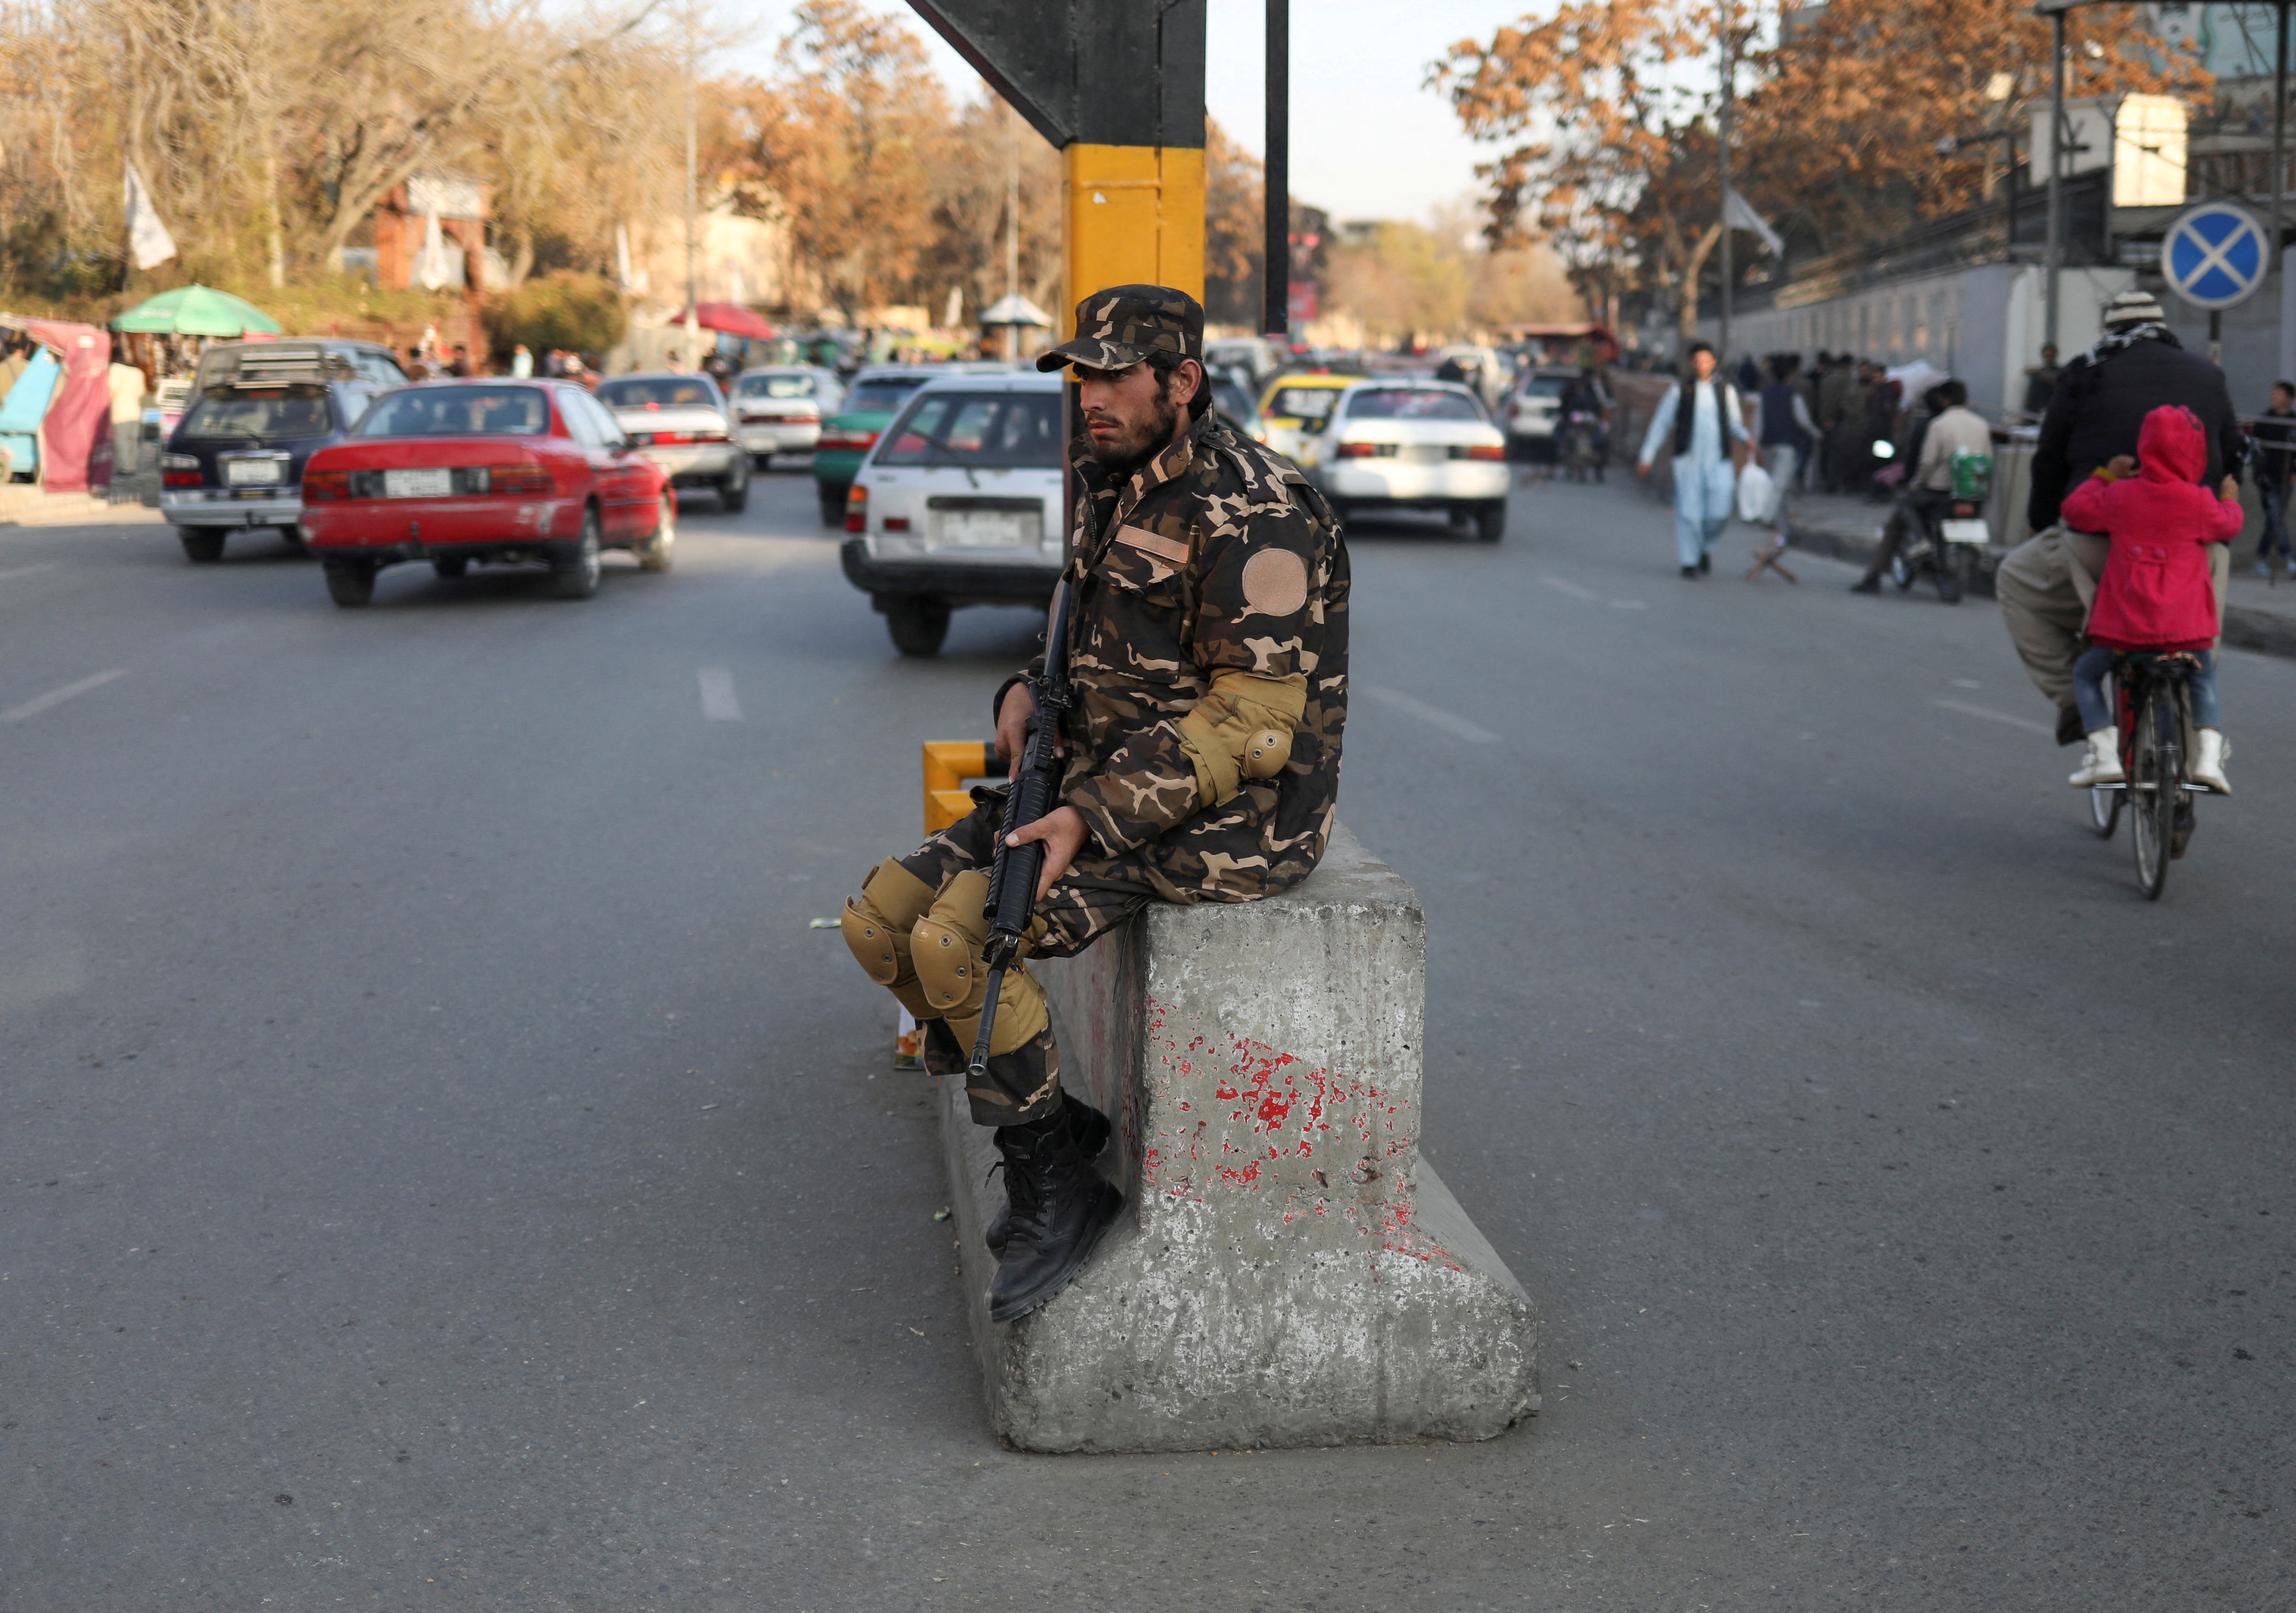 A Taliban fighter guards a street in Kabul, Afghanistan November 25, 2021. REUTERS/Ali Khara/